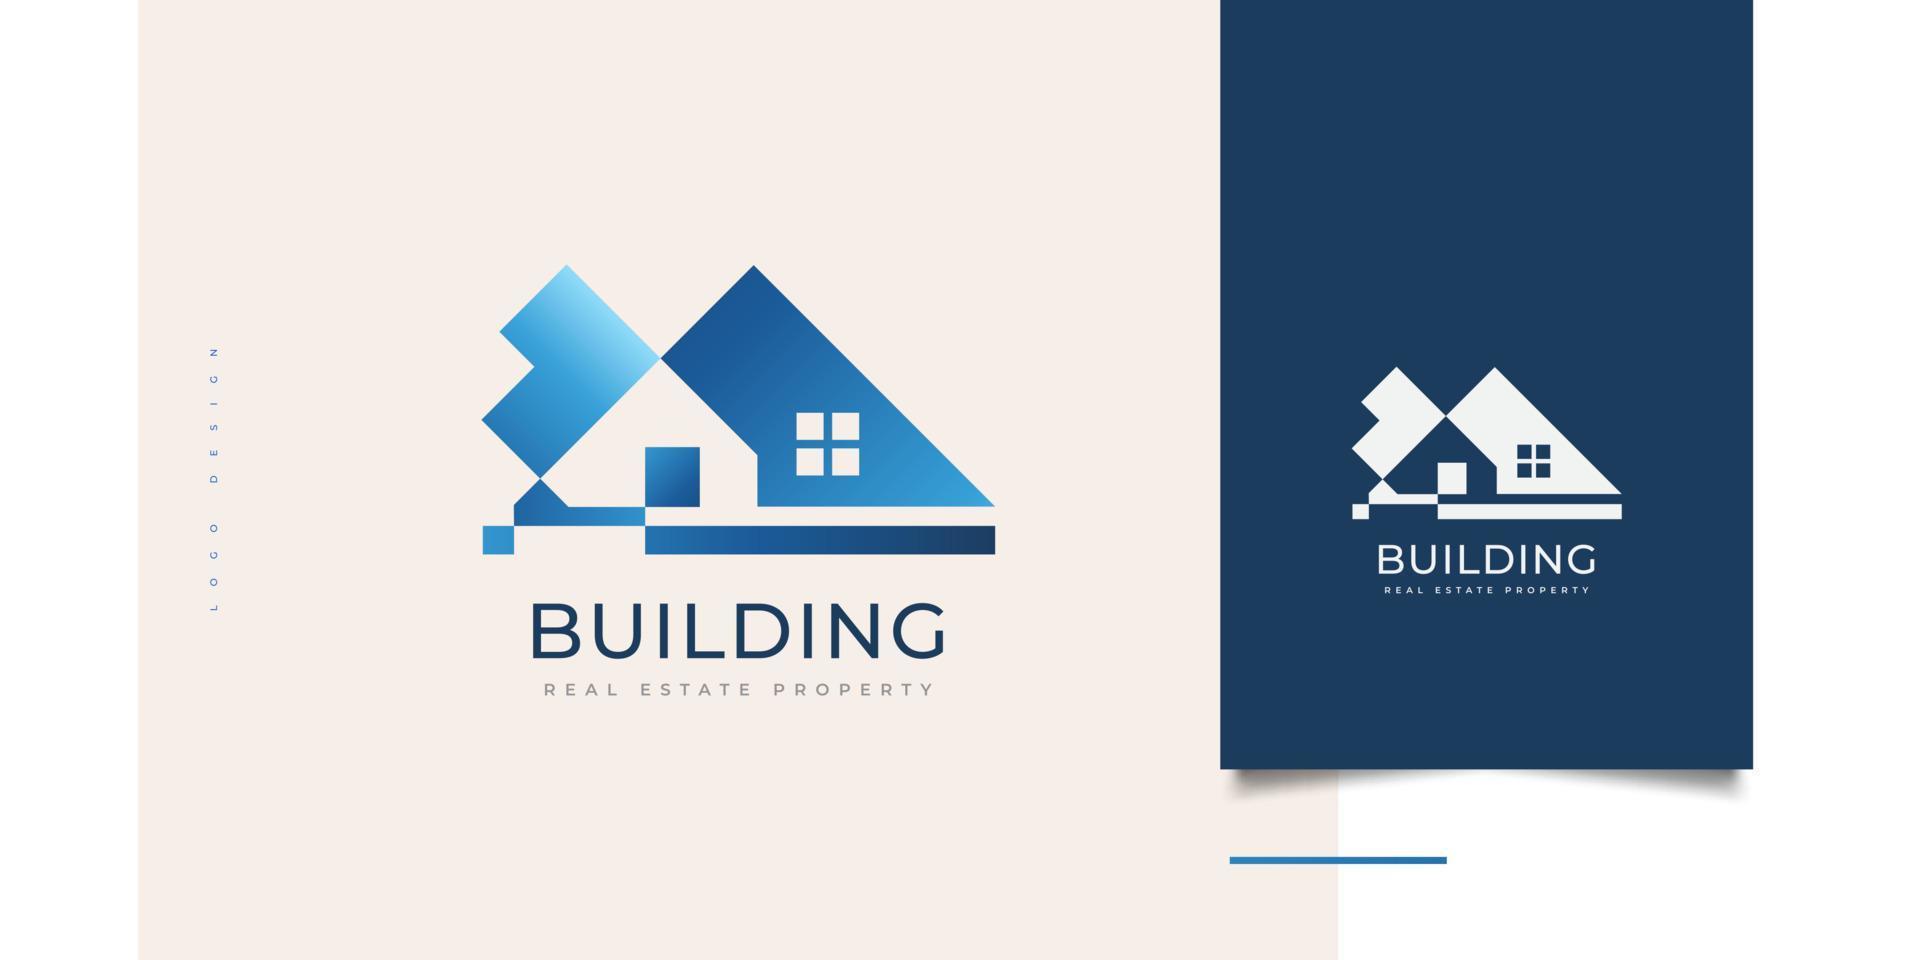 Abstract Blue Modern Real Estate Logo Design. Architecture or Construction Industry Brand Identity. Abstract Building Icon vector